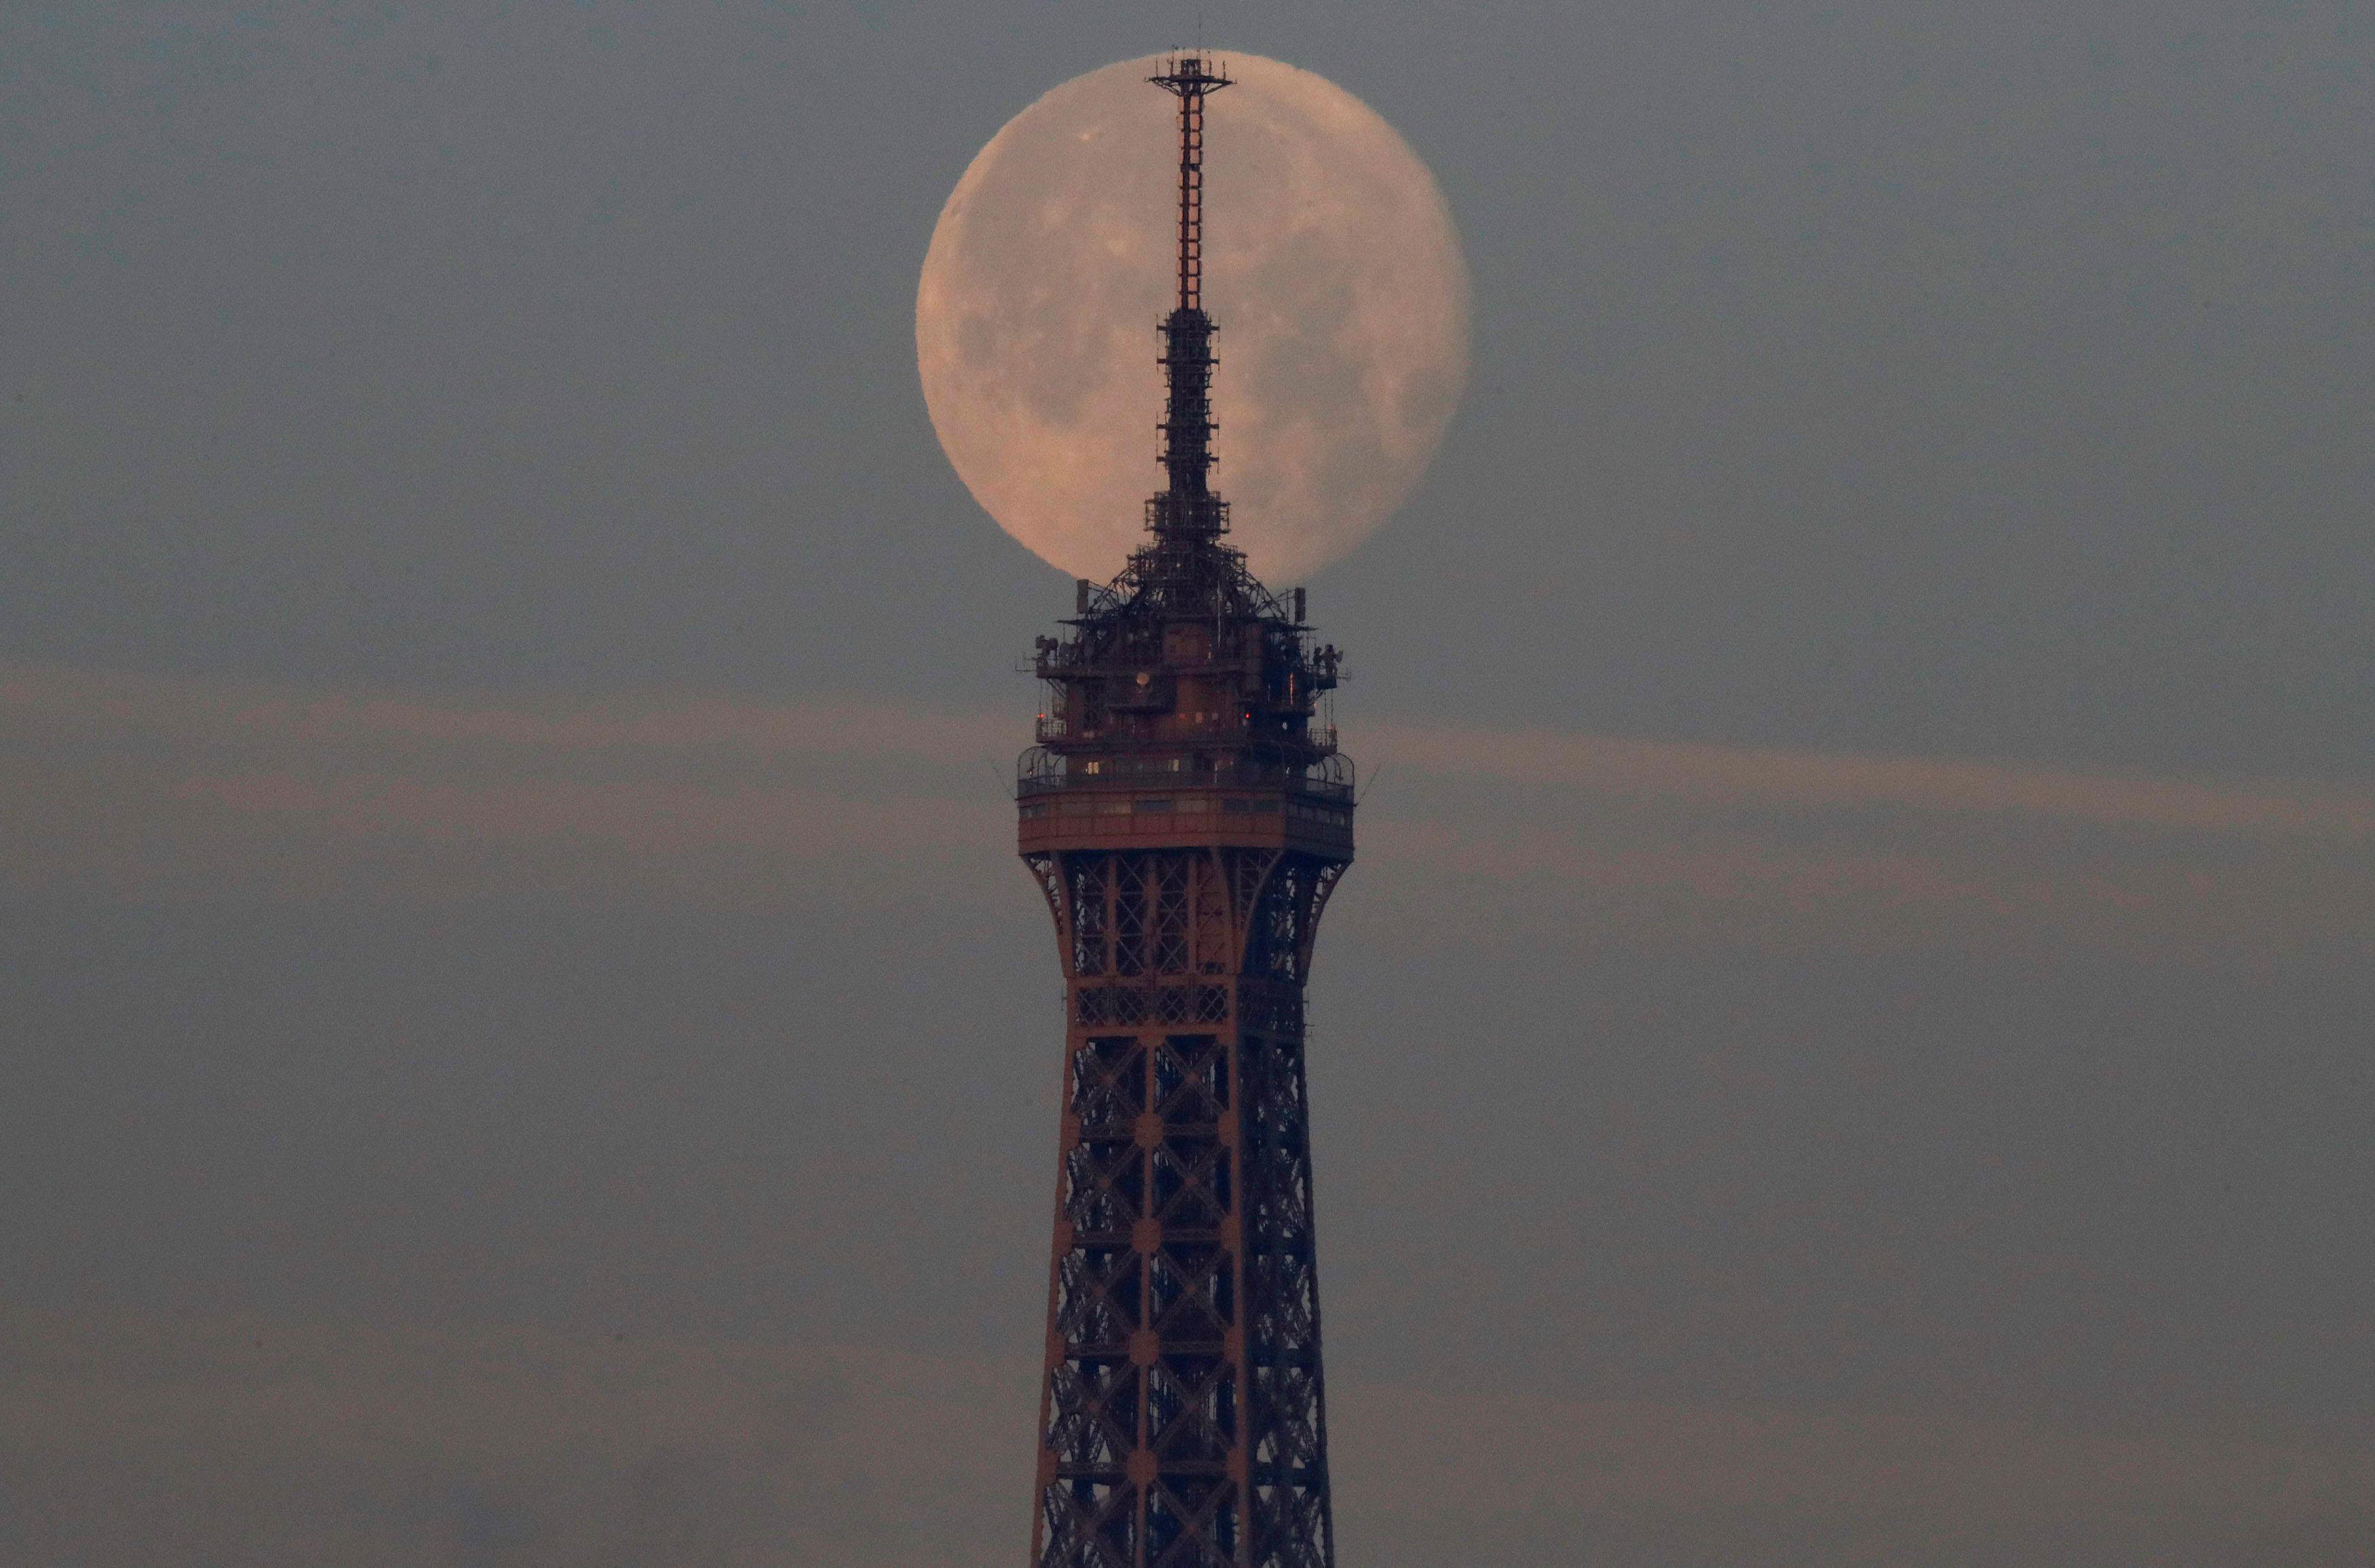 The moon sets over the Eiffel Tower in Paris